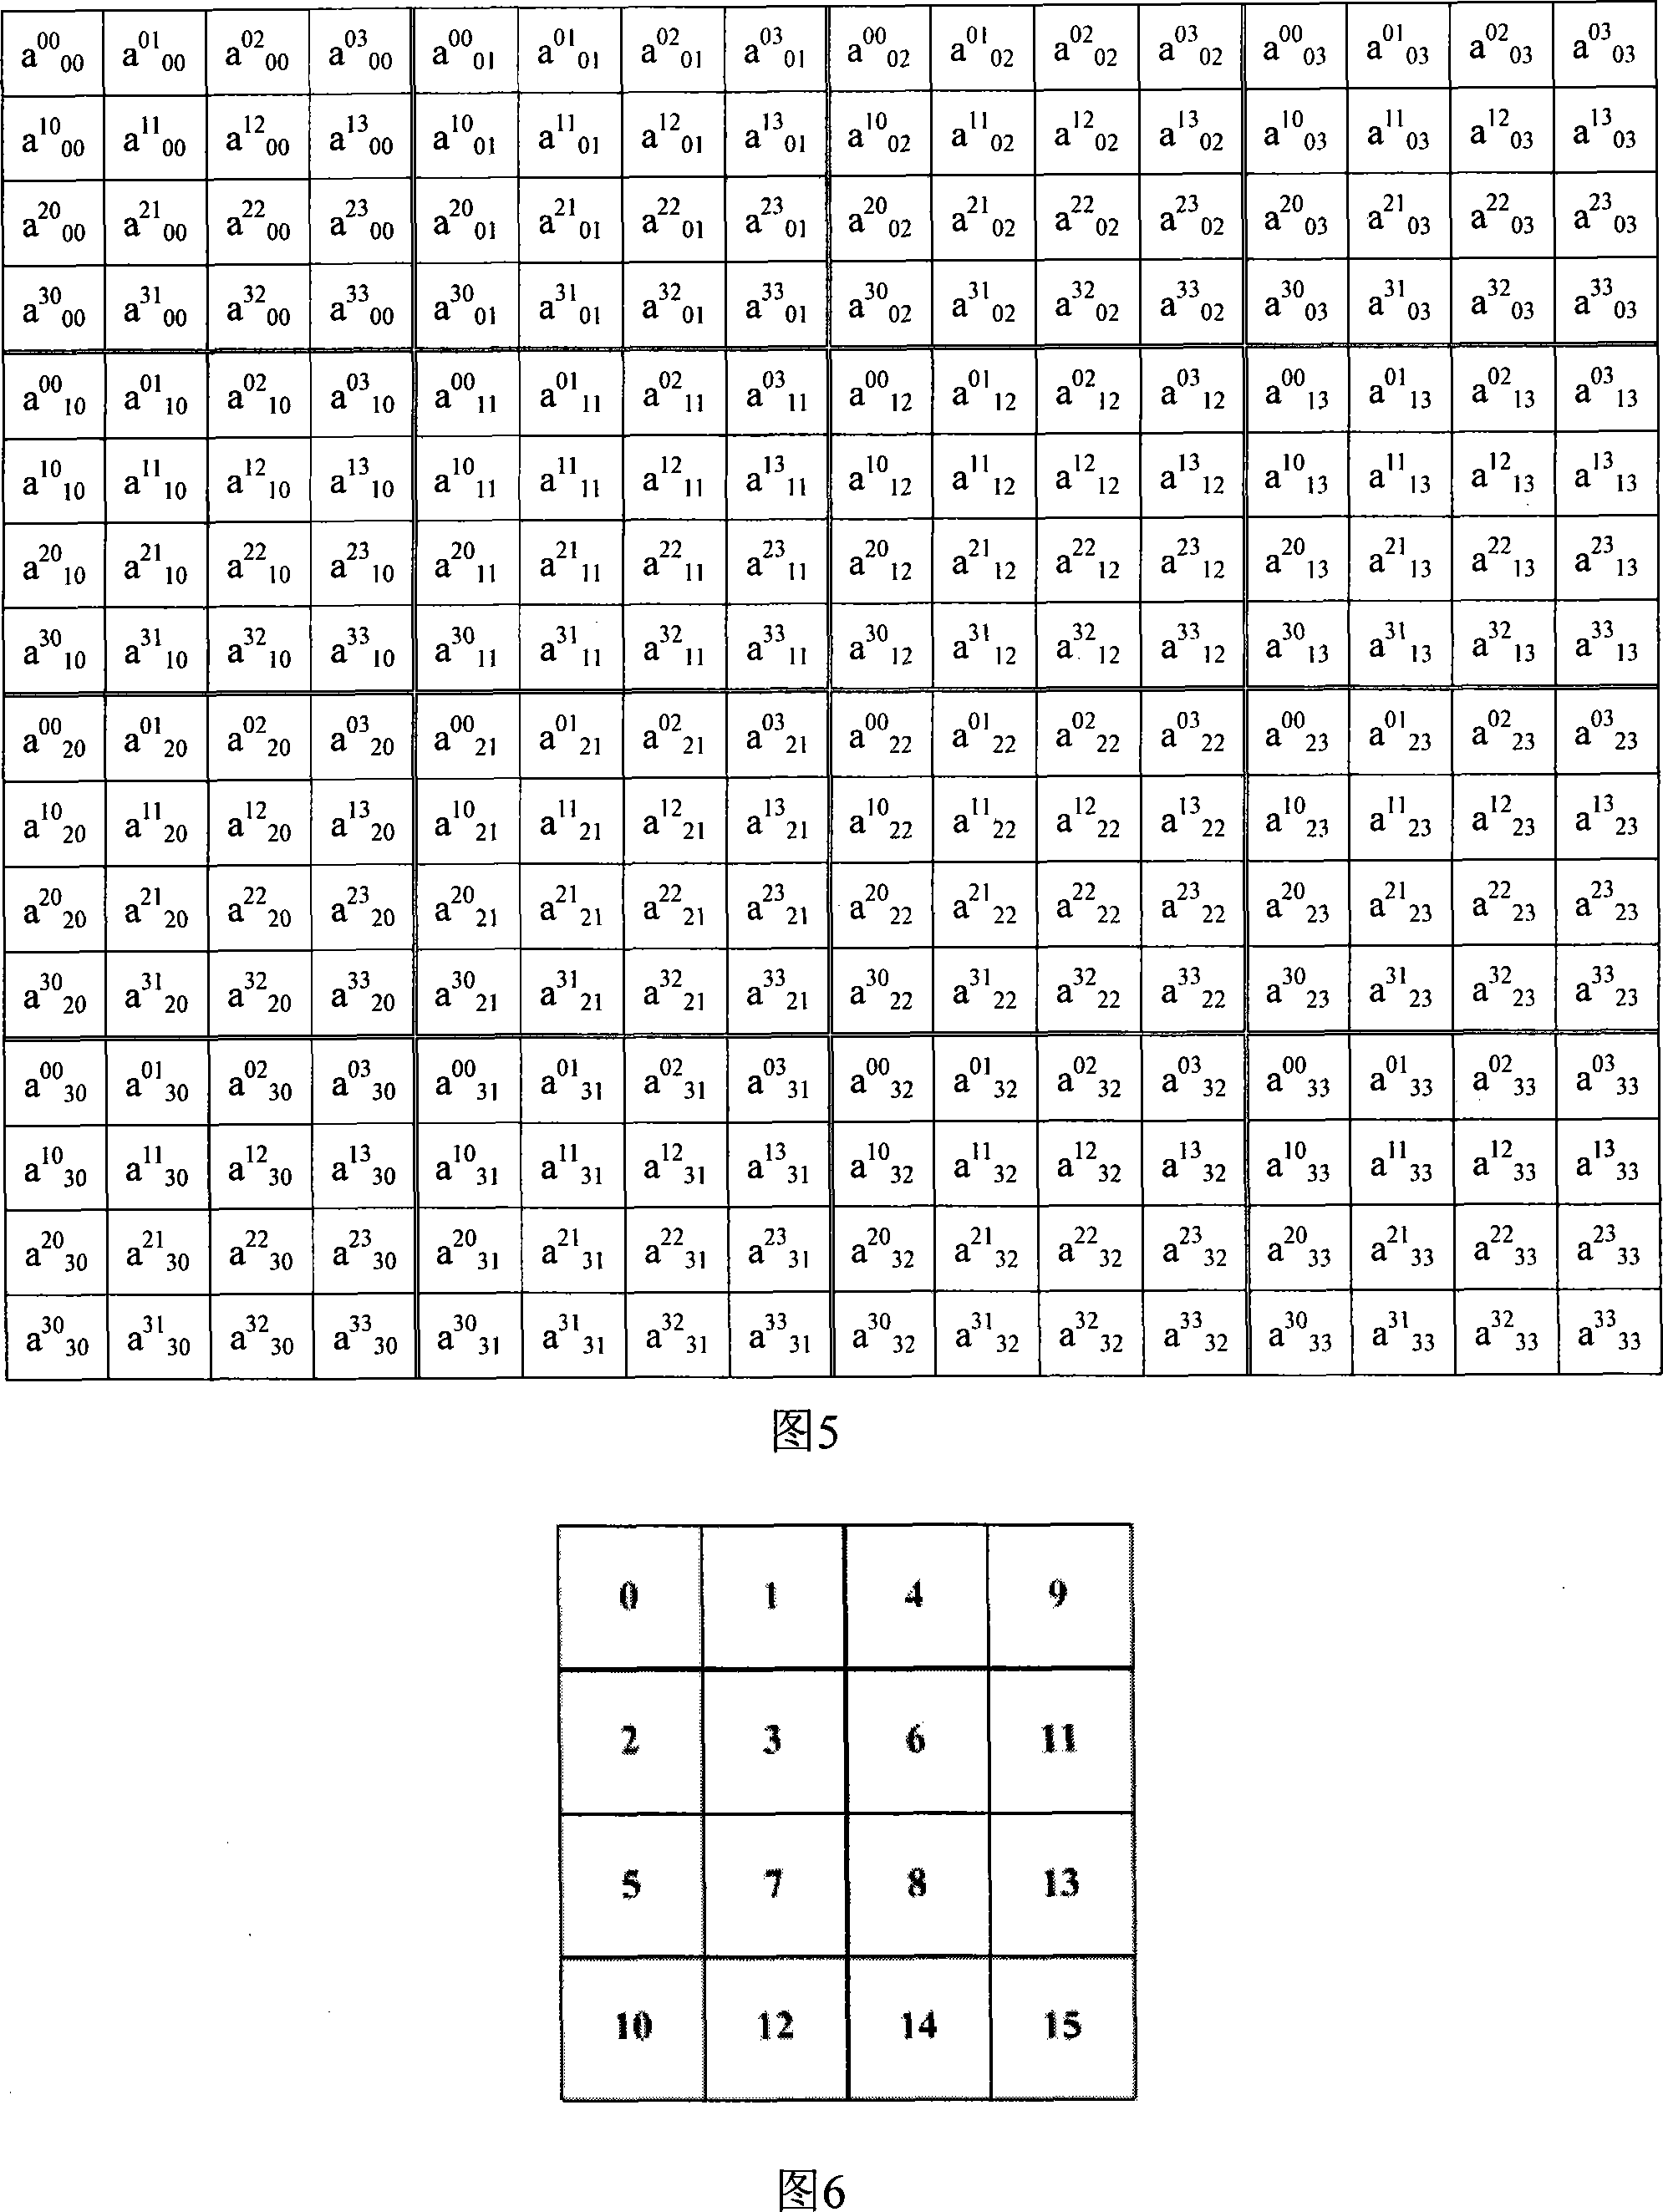 DCT-based resolution flexible image coding and decoding method